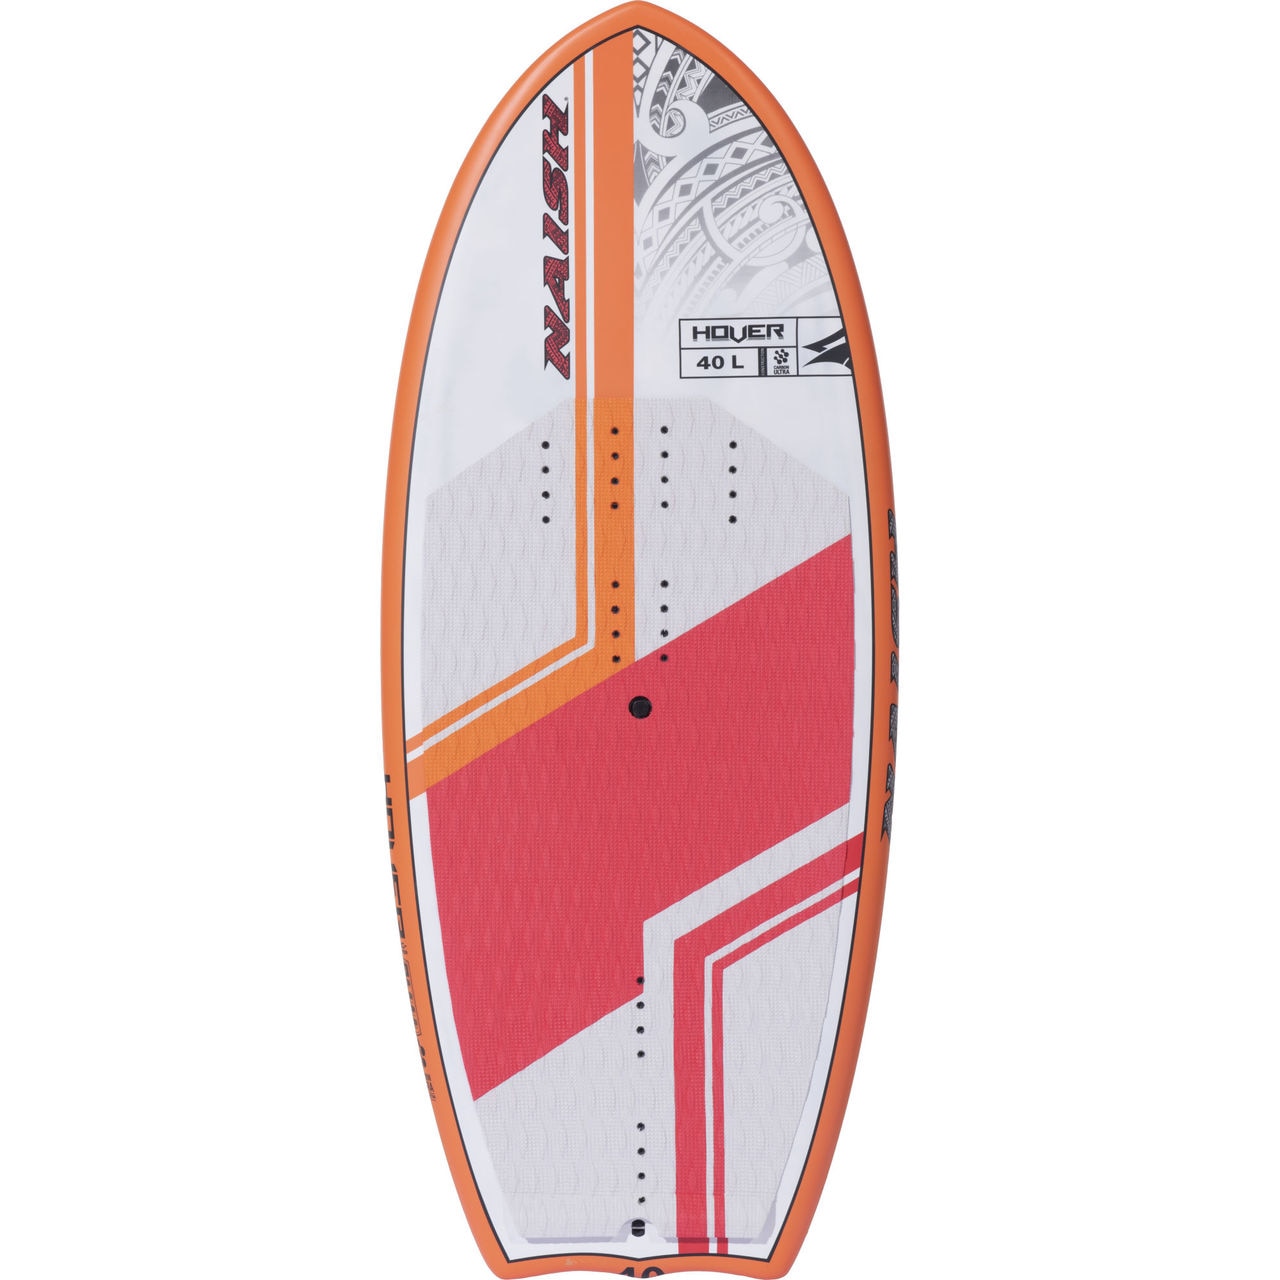 naish-2021-s25-hover-wing-sup-carbon-ultra-foil-40-top__19590.1593458691